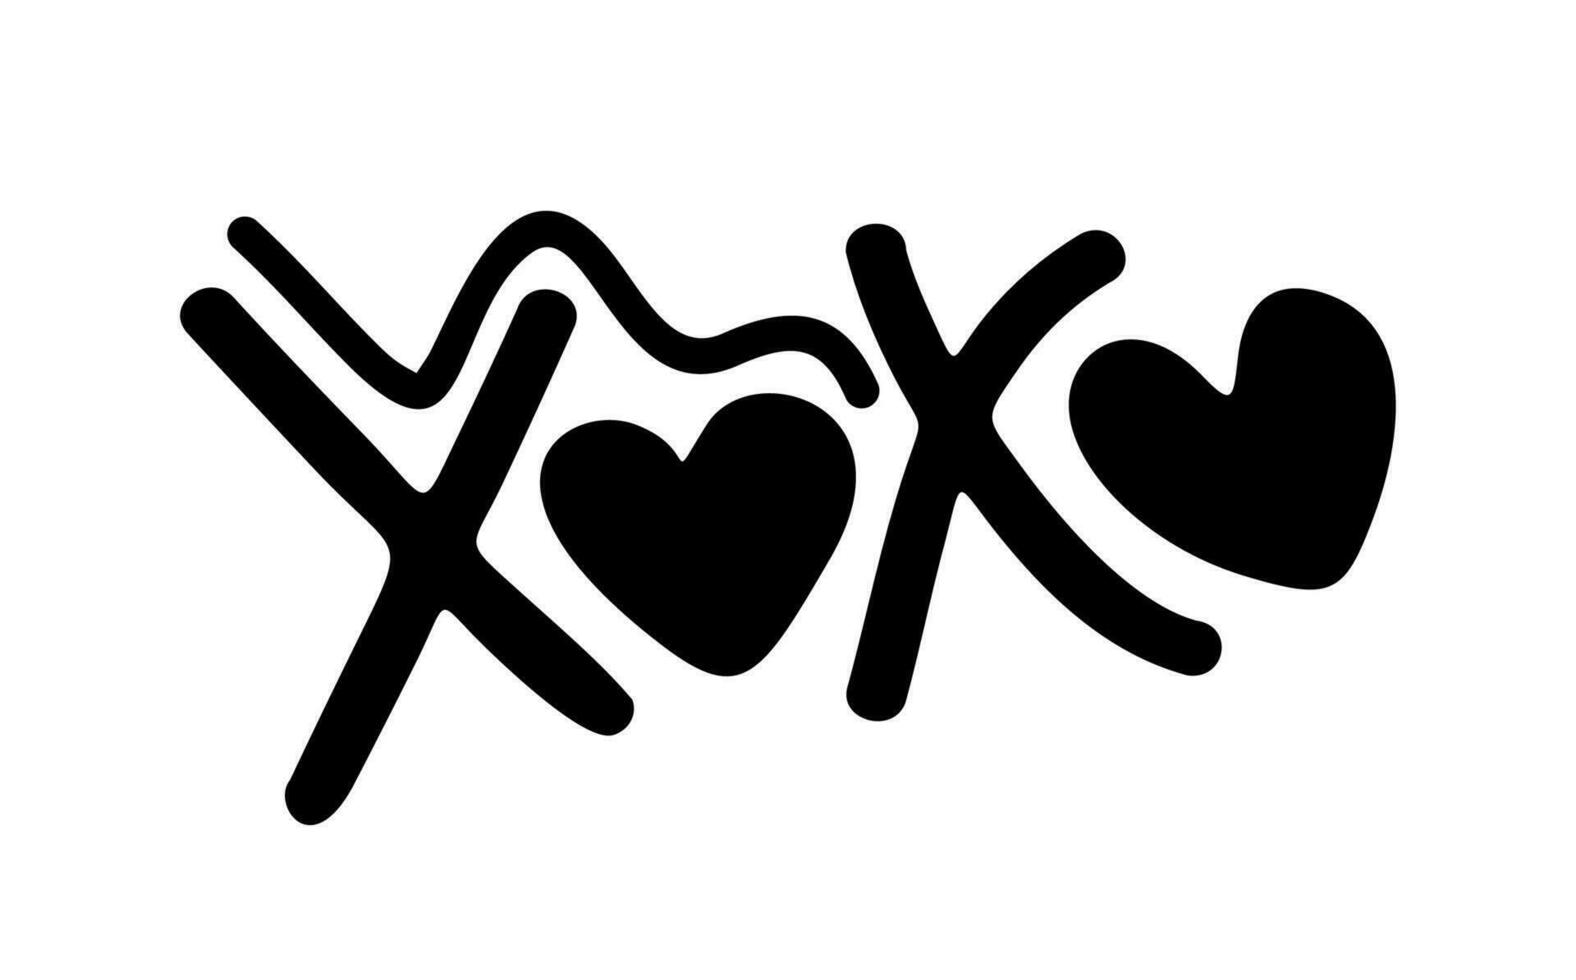 XoXo. Hand drawn black lettering. Online chat sticker. Vector isolated on white background. Exclamation. Doodle illustration.